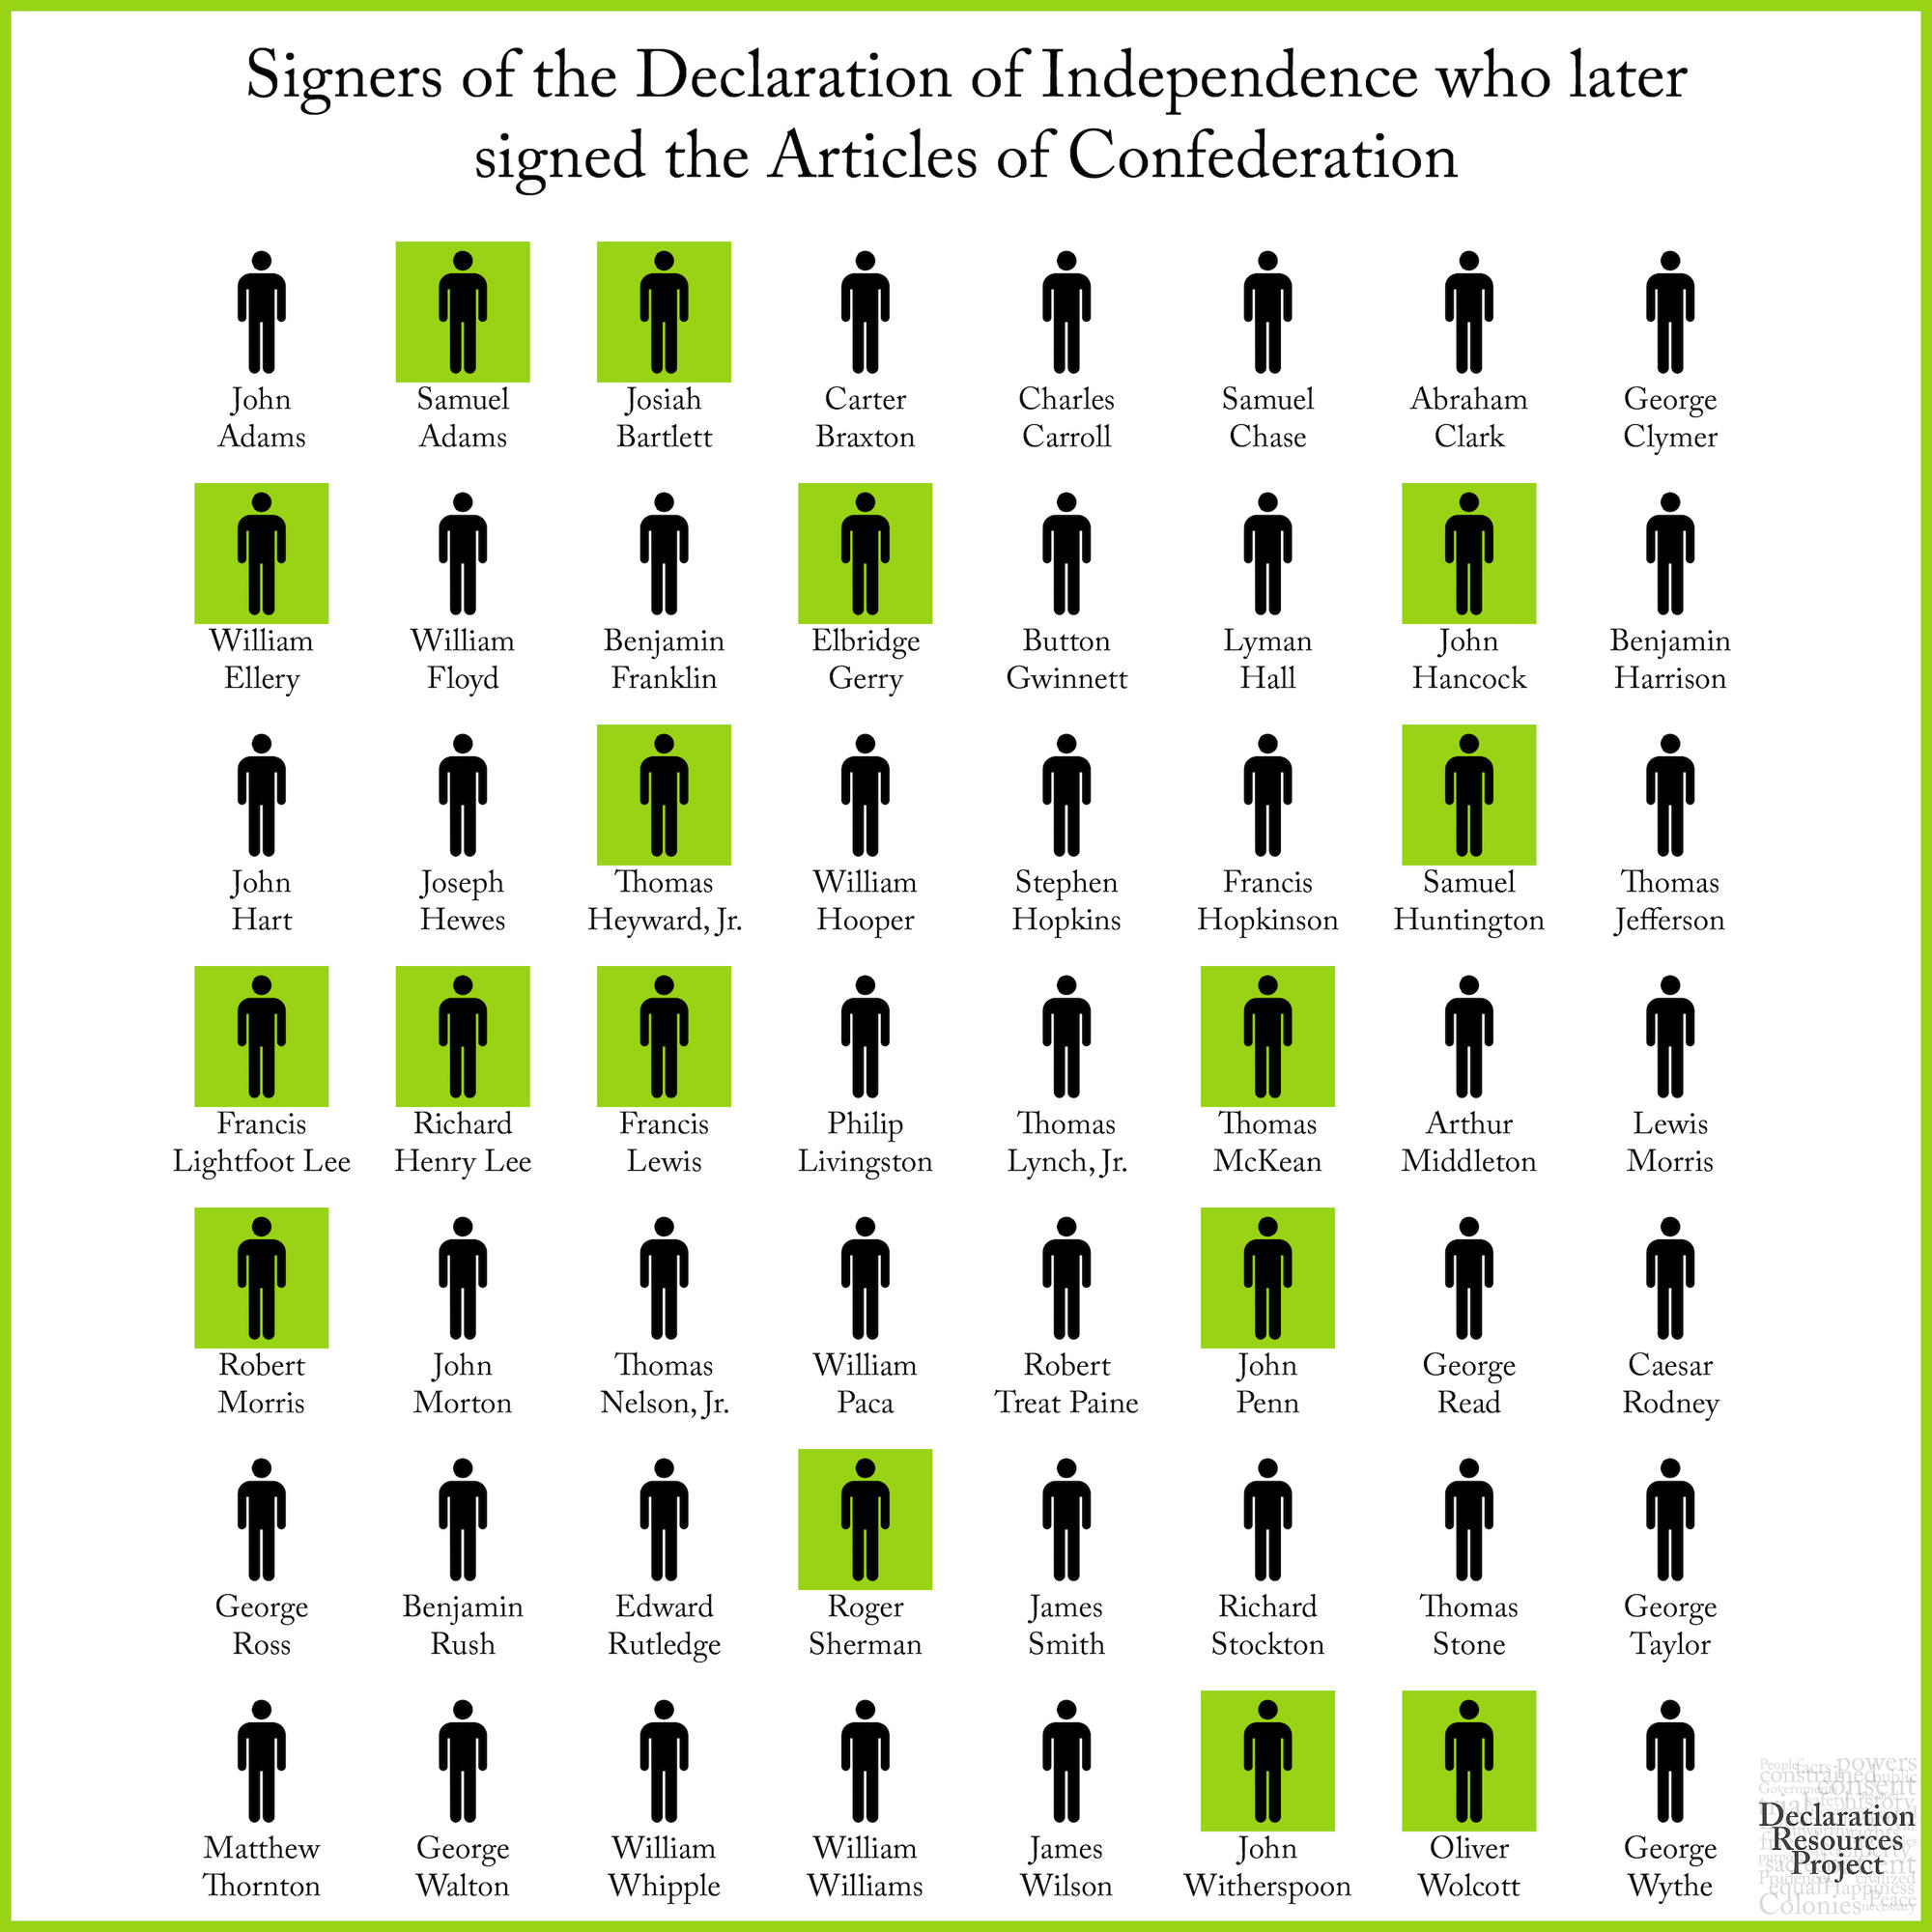 Signers of the Declaration who later signed the Articles of Confederation